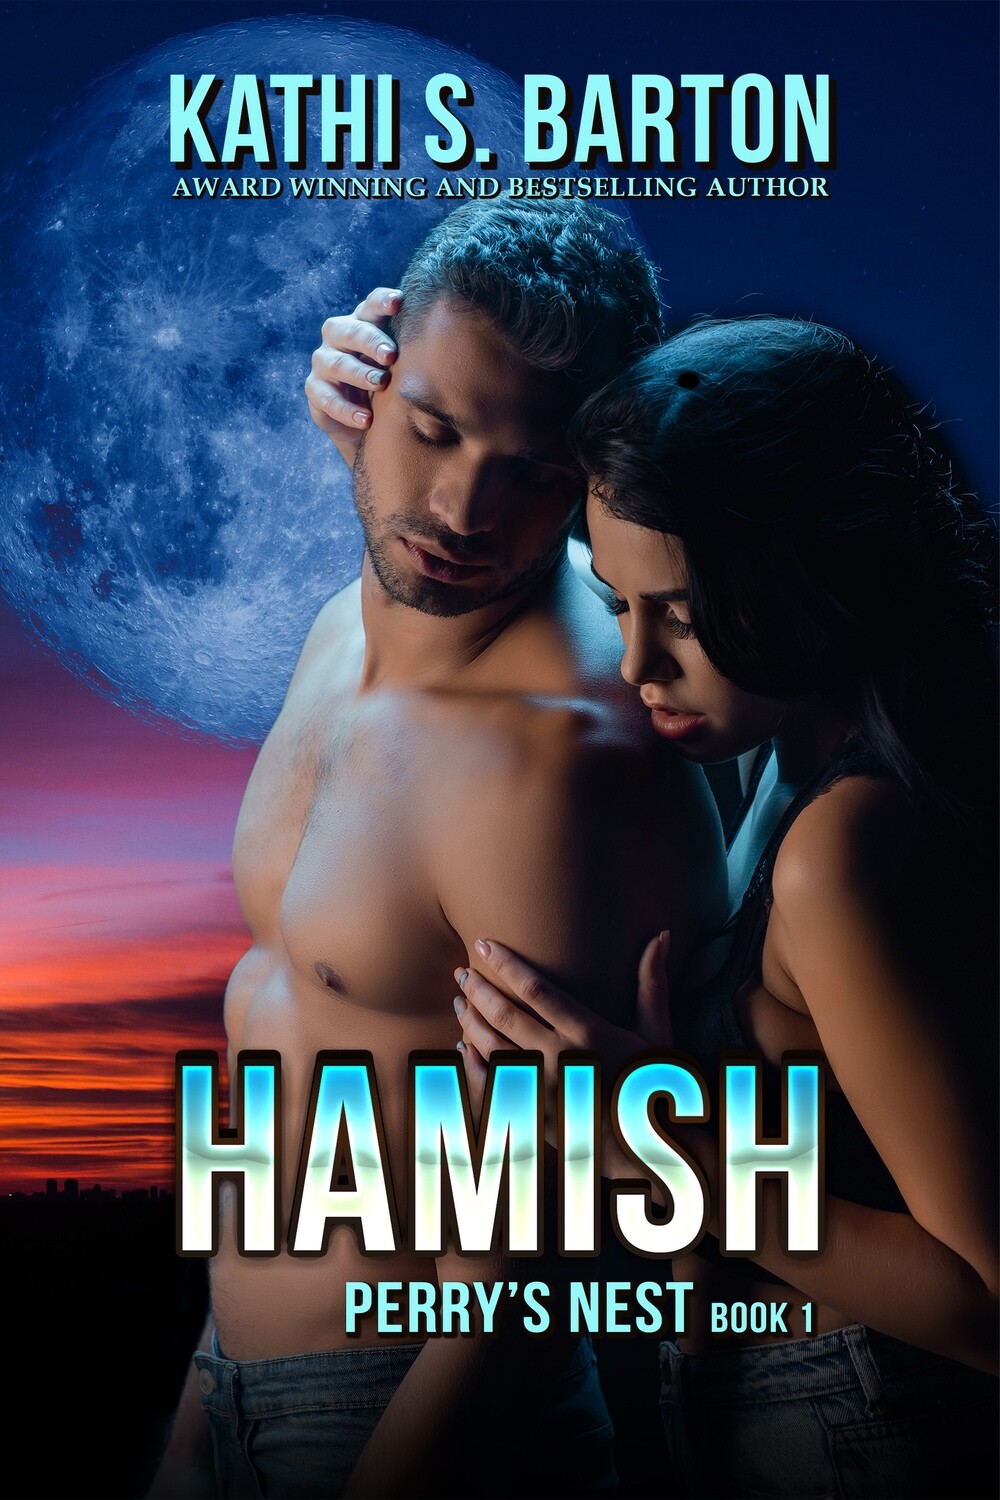 Hamish - Perry's Nest Book 1 - eBook